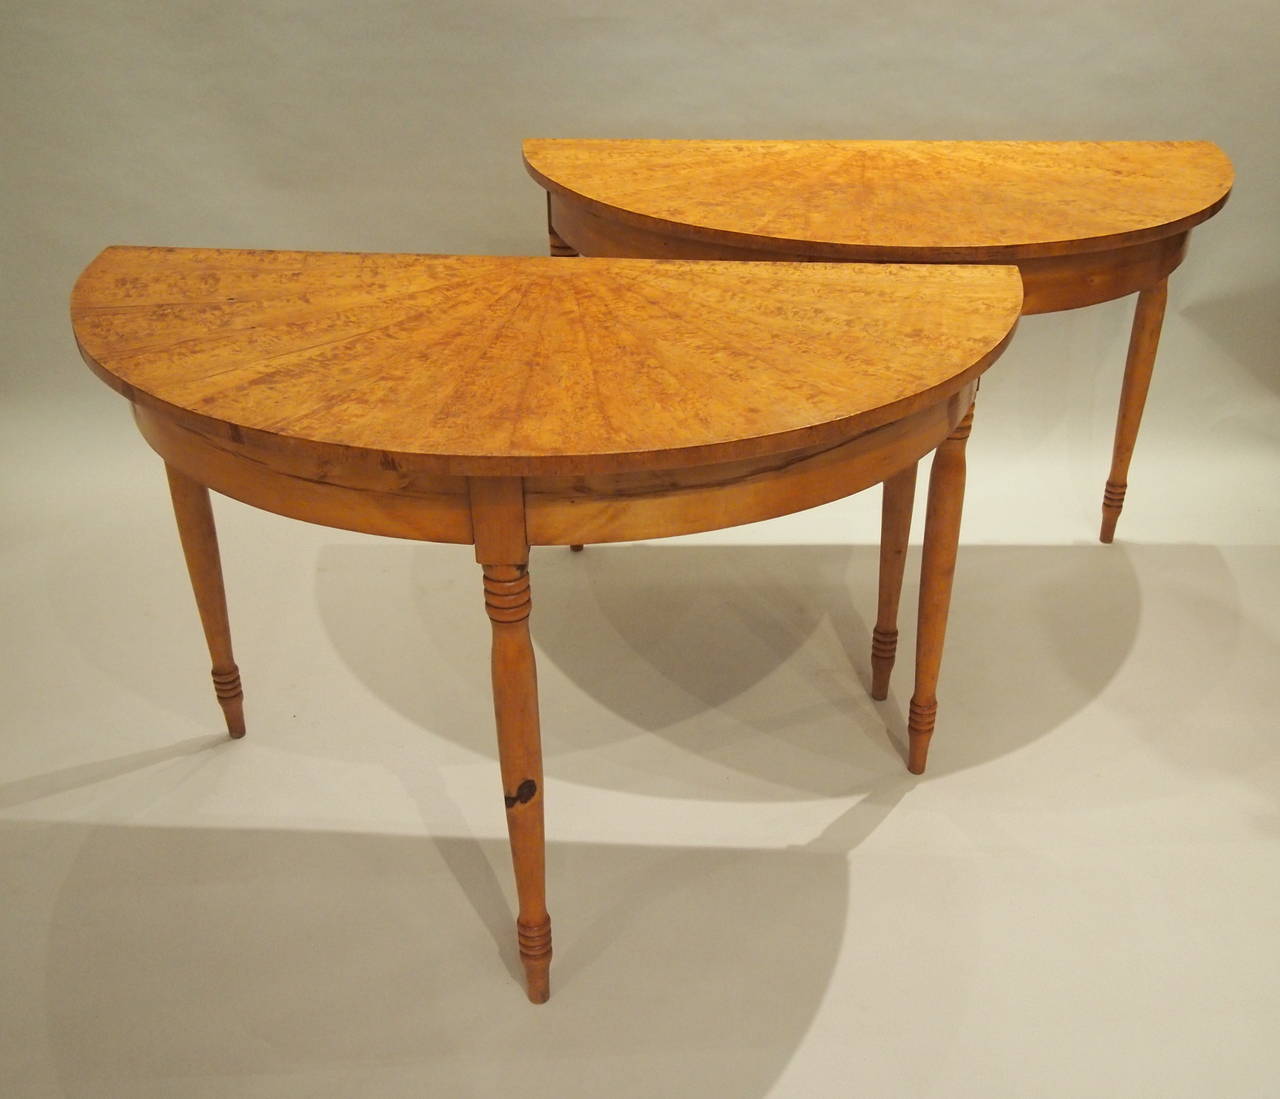 Wonderful Swedish table of two demilune halves with Karelian birch veneered top that has been executed in the image of a sunburst. The table legs are solid birch. They can be used together as a small dining table or separately on either side of a